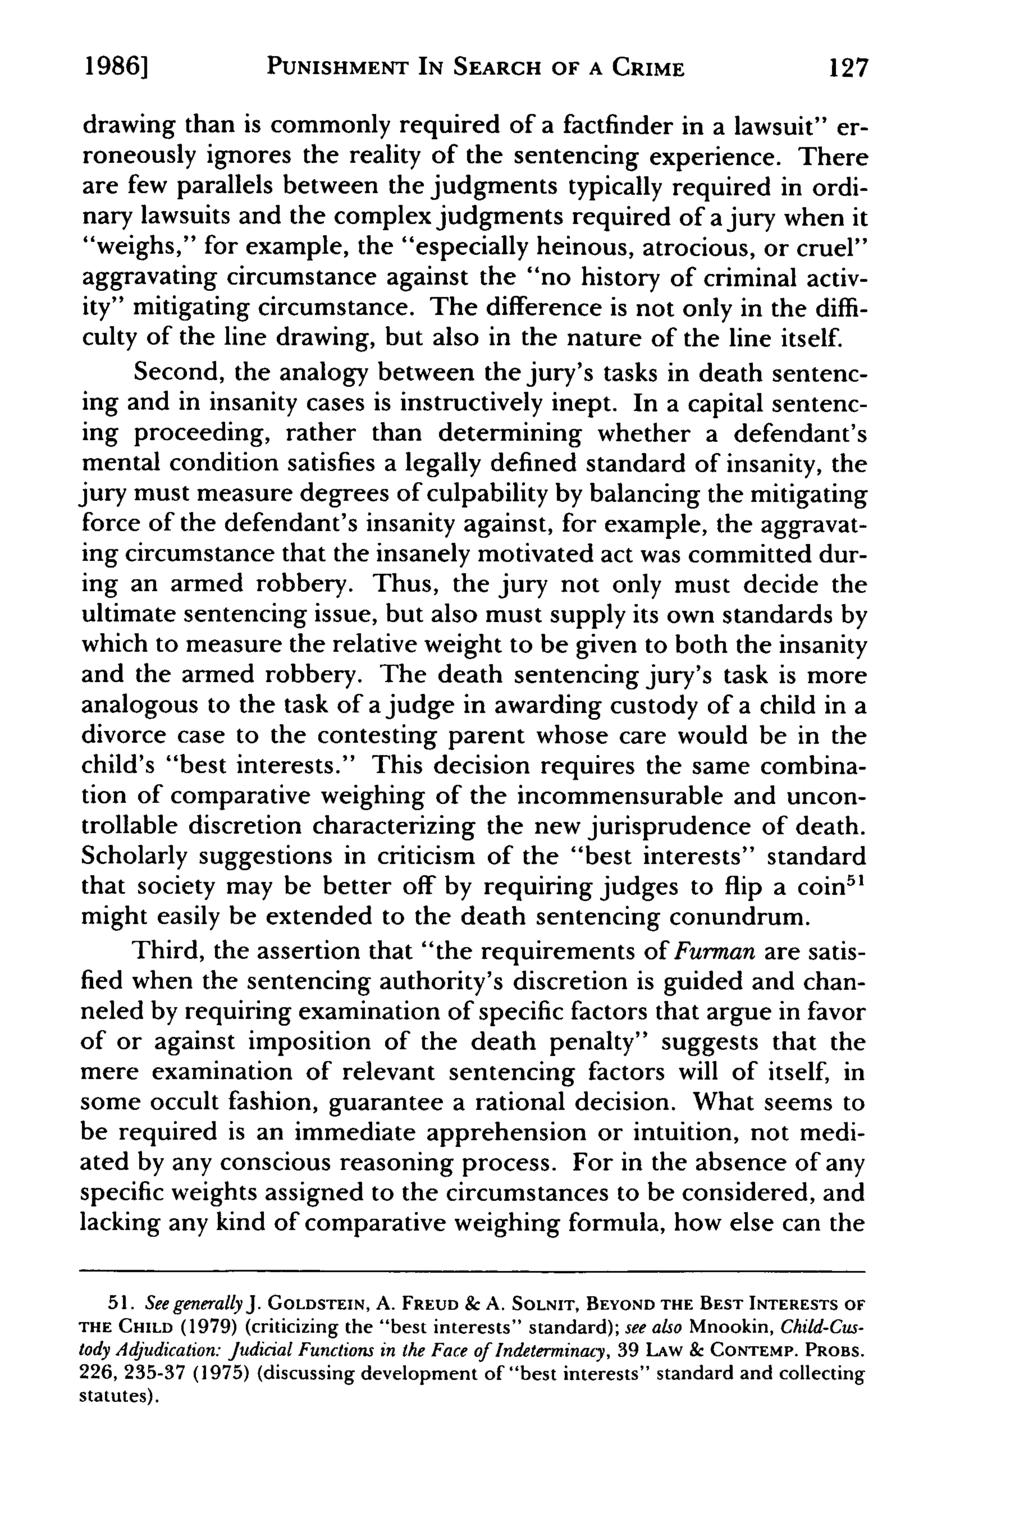 1986] PUNISHMENT IN SEARCH OF A CRIME drawing than is commonly required of a factfinder in a lawsuit" erroneously ignores the reality of the sentencing experience.